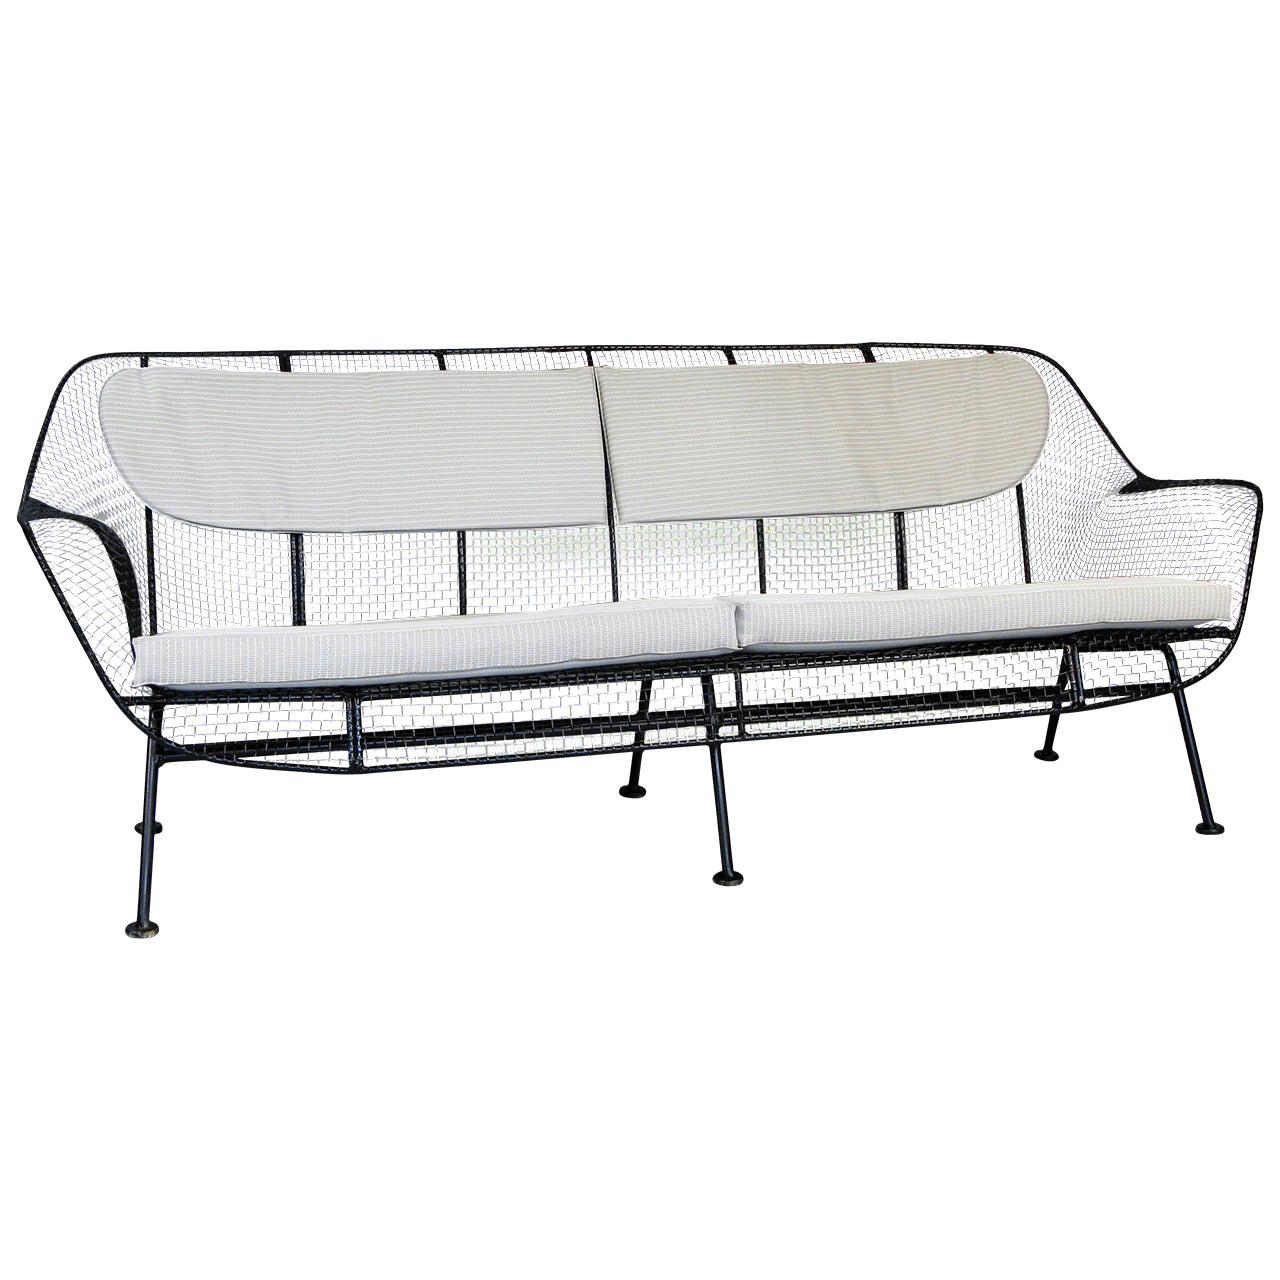 Rare 1950s Sculpture Sofa by Russell Woodard